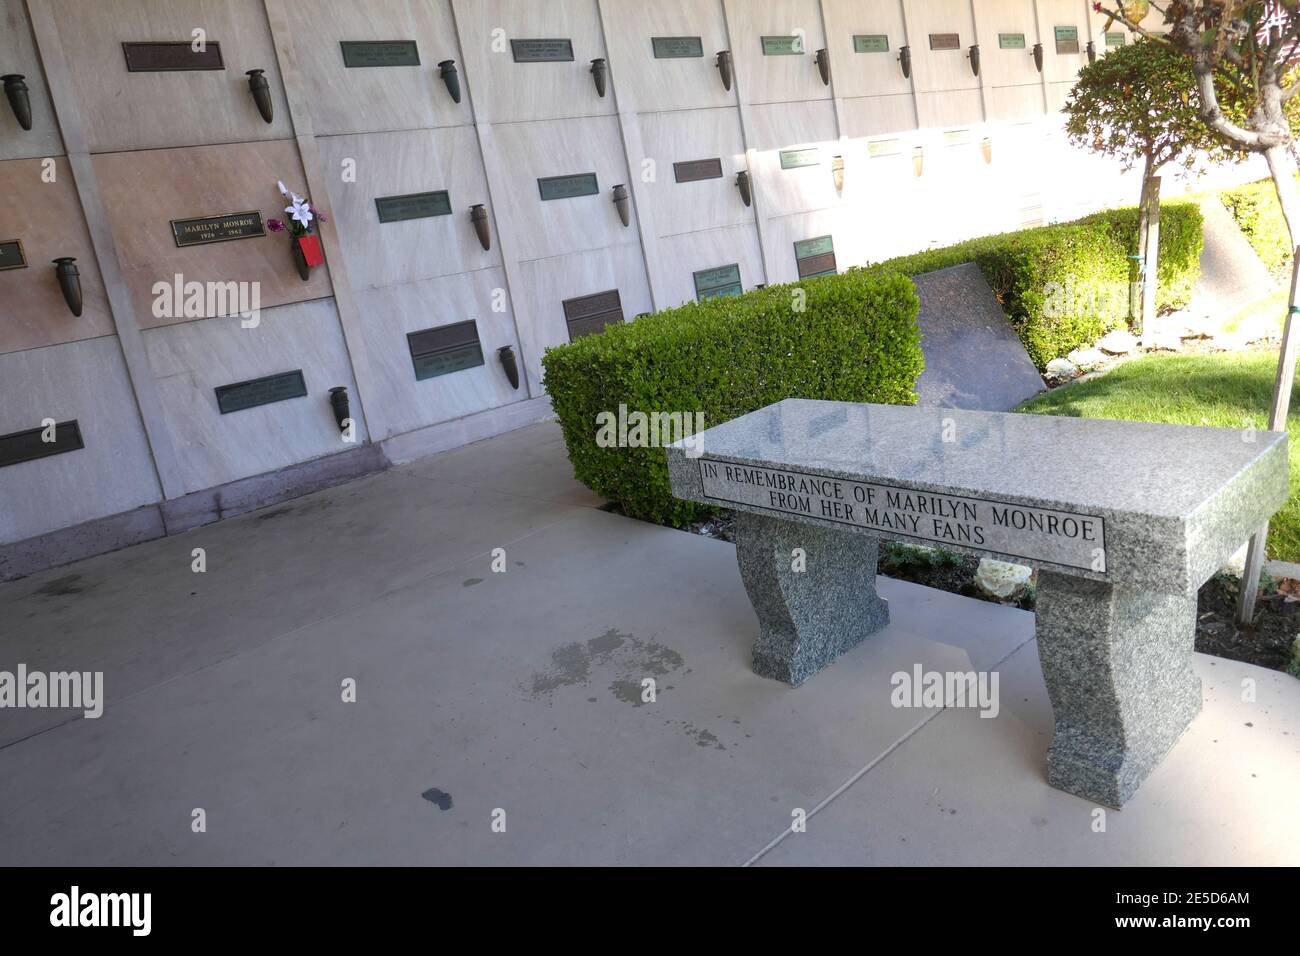 Los Angeles, California, USA 26th January 2021 A general view of atmosphere of actress Marilyn Monroe's grave and bench at Pierce Brothers Westwood Village Memorial Park on January 26, 2021 in Los Angeles, California, USA. Photo by Barry King/Alamy Stock Photo Stock Photo